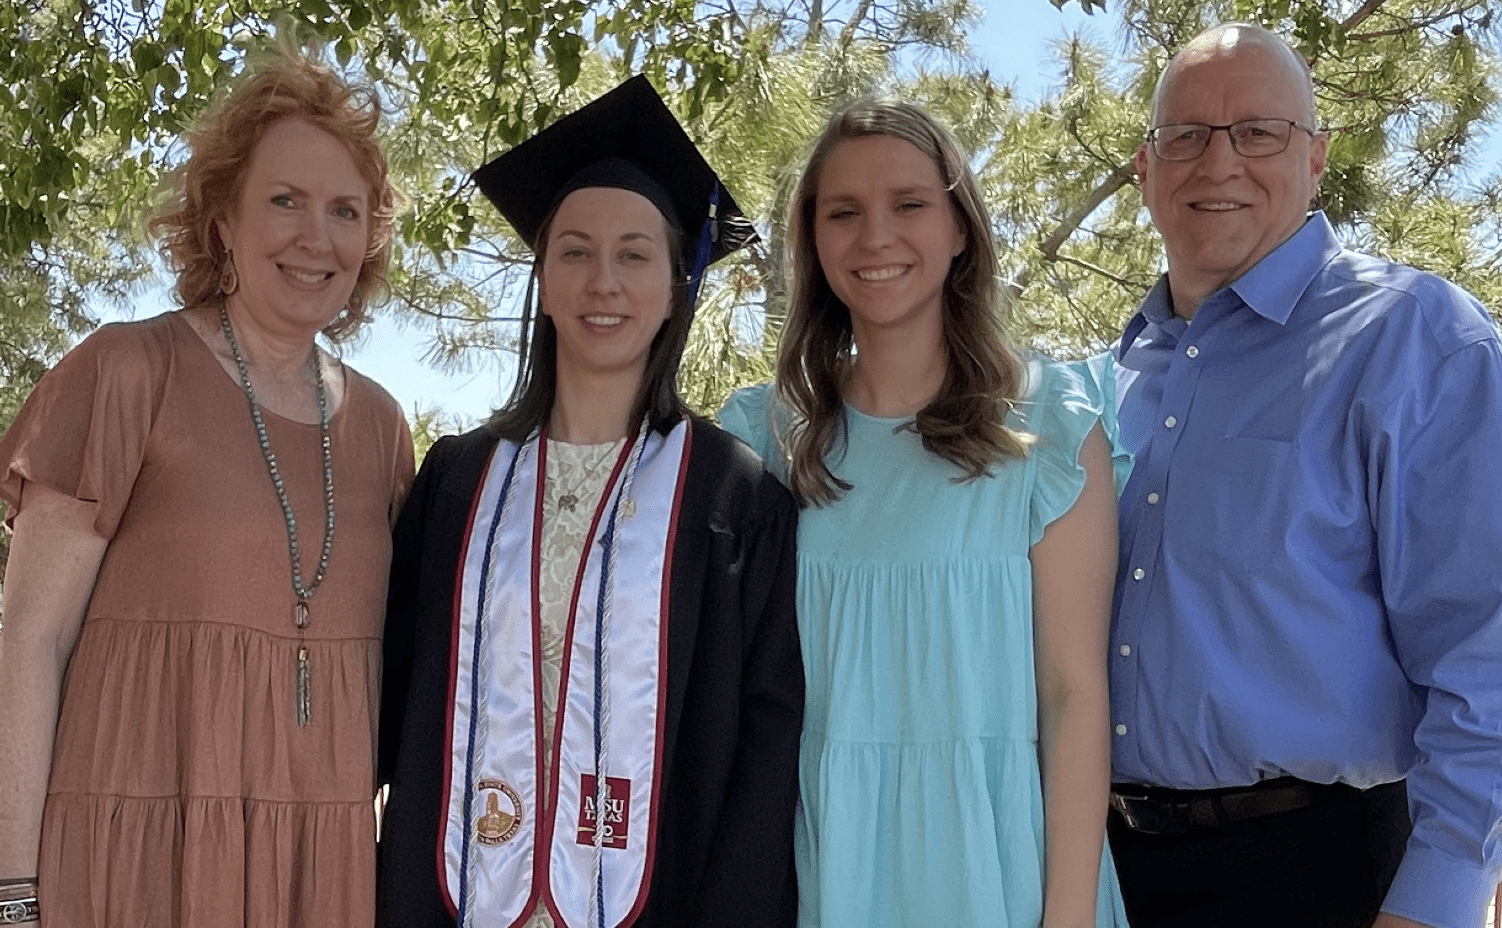 Emma and family at her college graduation